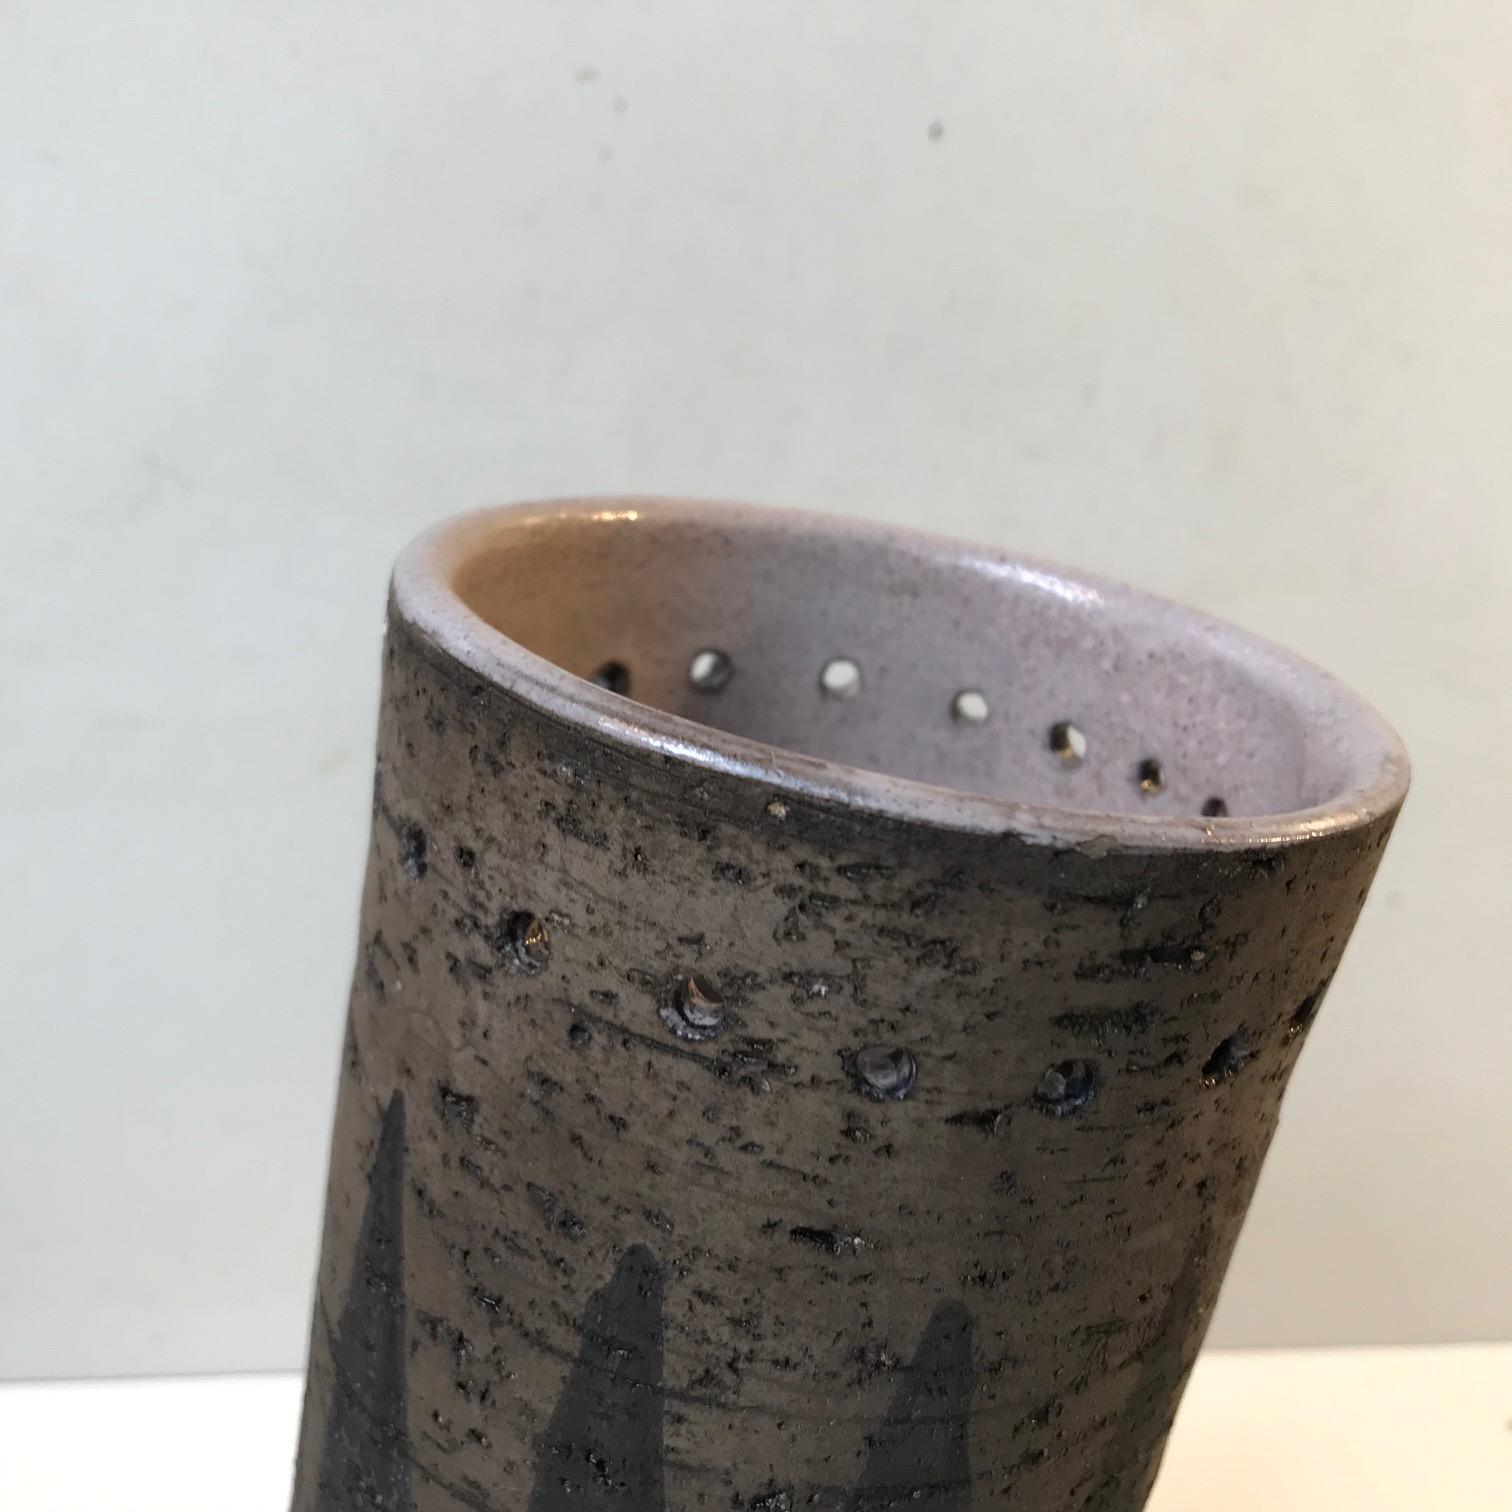 Unusual and unique cylindrical vase in chamotte clay. Partially unglazed exterior decorated with black arrow and see-through horizontal piercings. The interior is fully glazed for practical reasons. It was designed during the early 1970s by ceramist